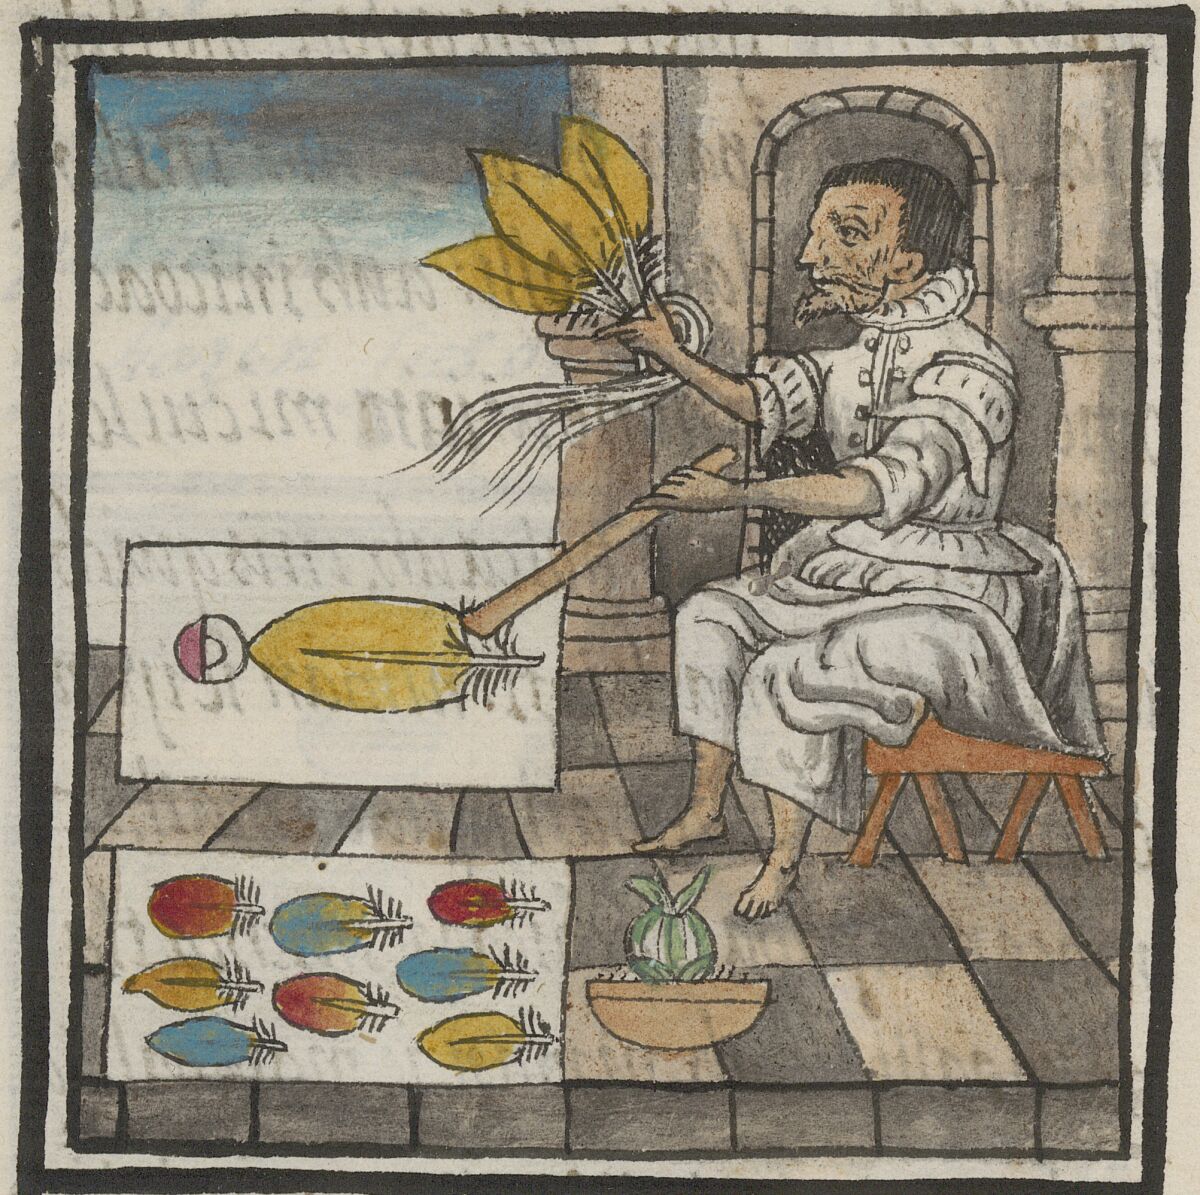 A detail from Book 9 of the Florentine Codex shows a feather worker preparing tropical bird feathers for a feather mosaic. The 16th century codex was created, in part, during a pandemic.